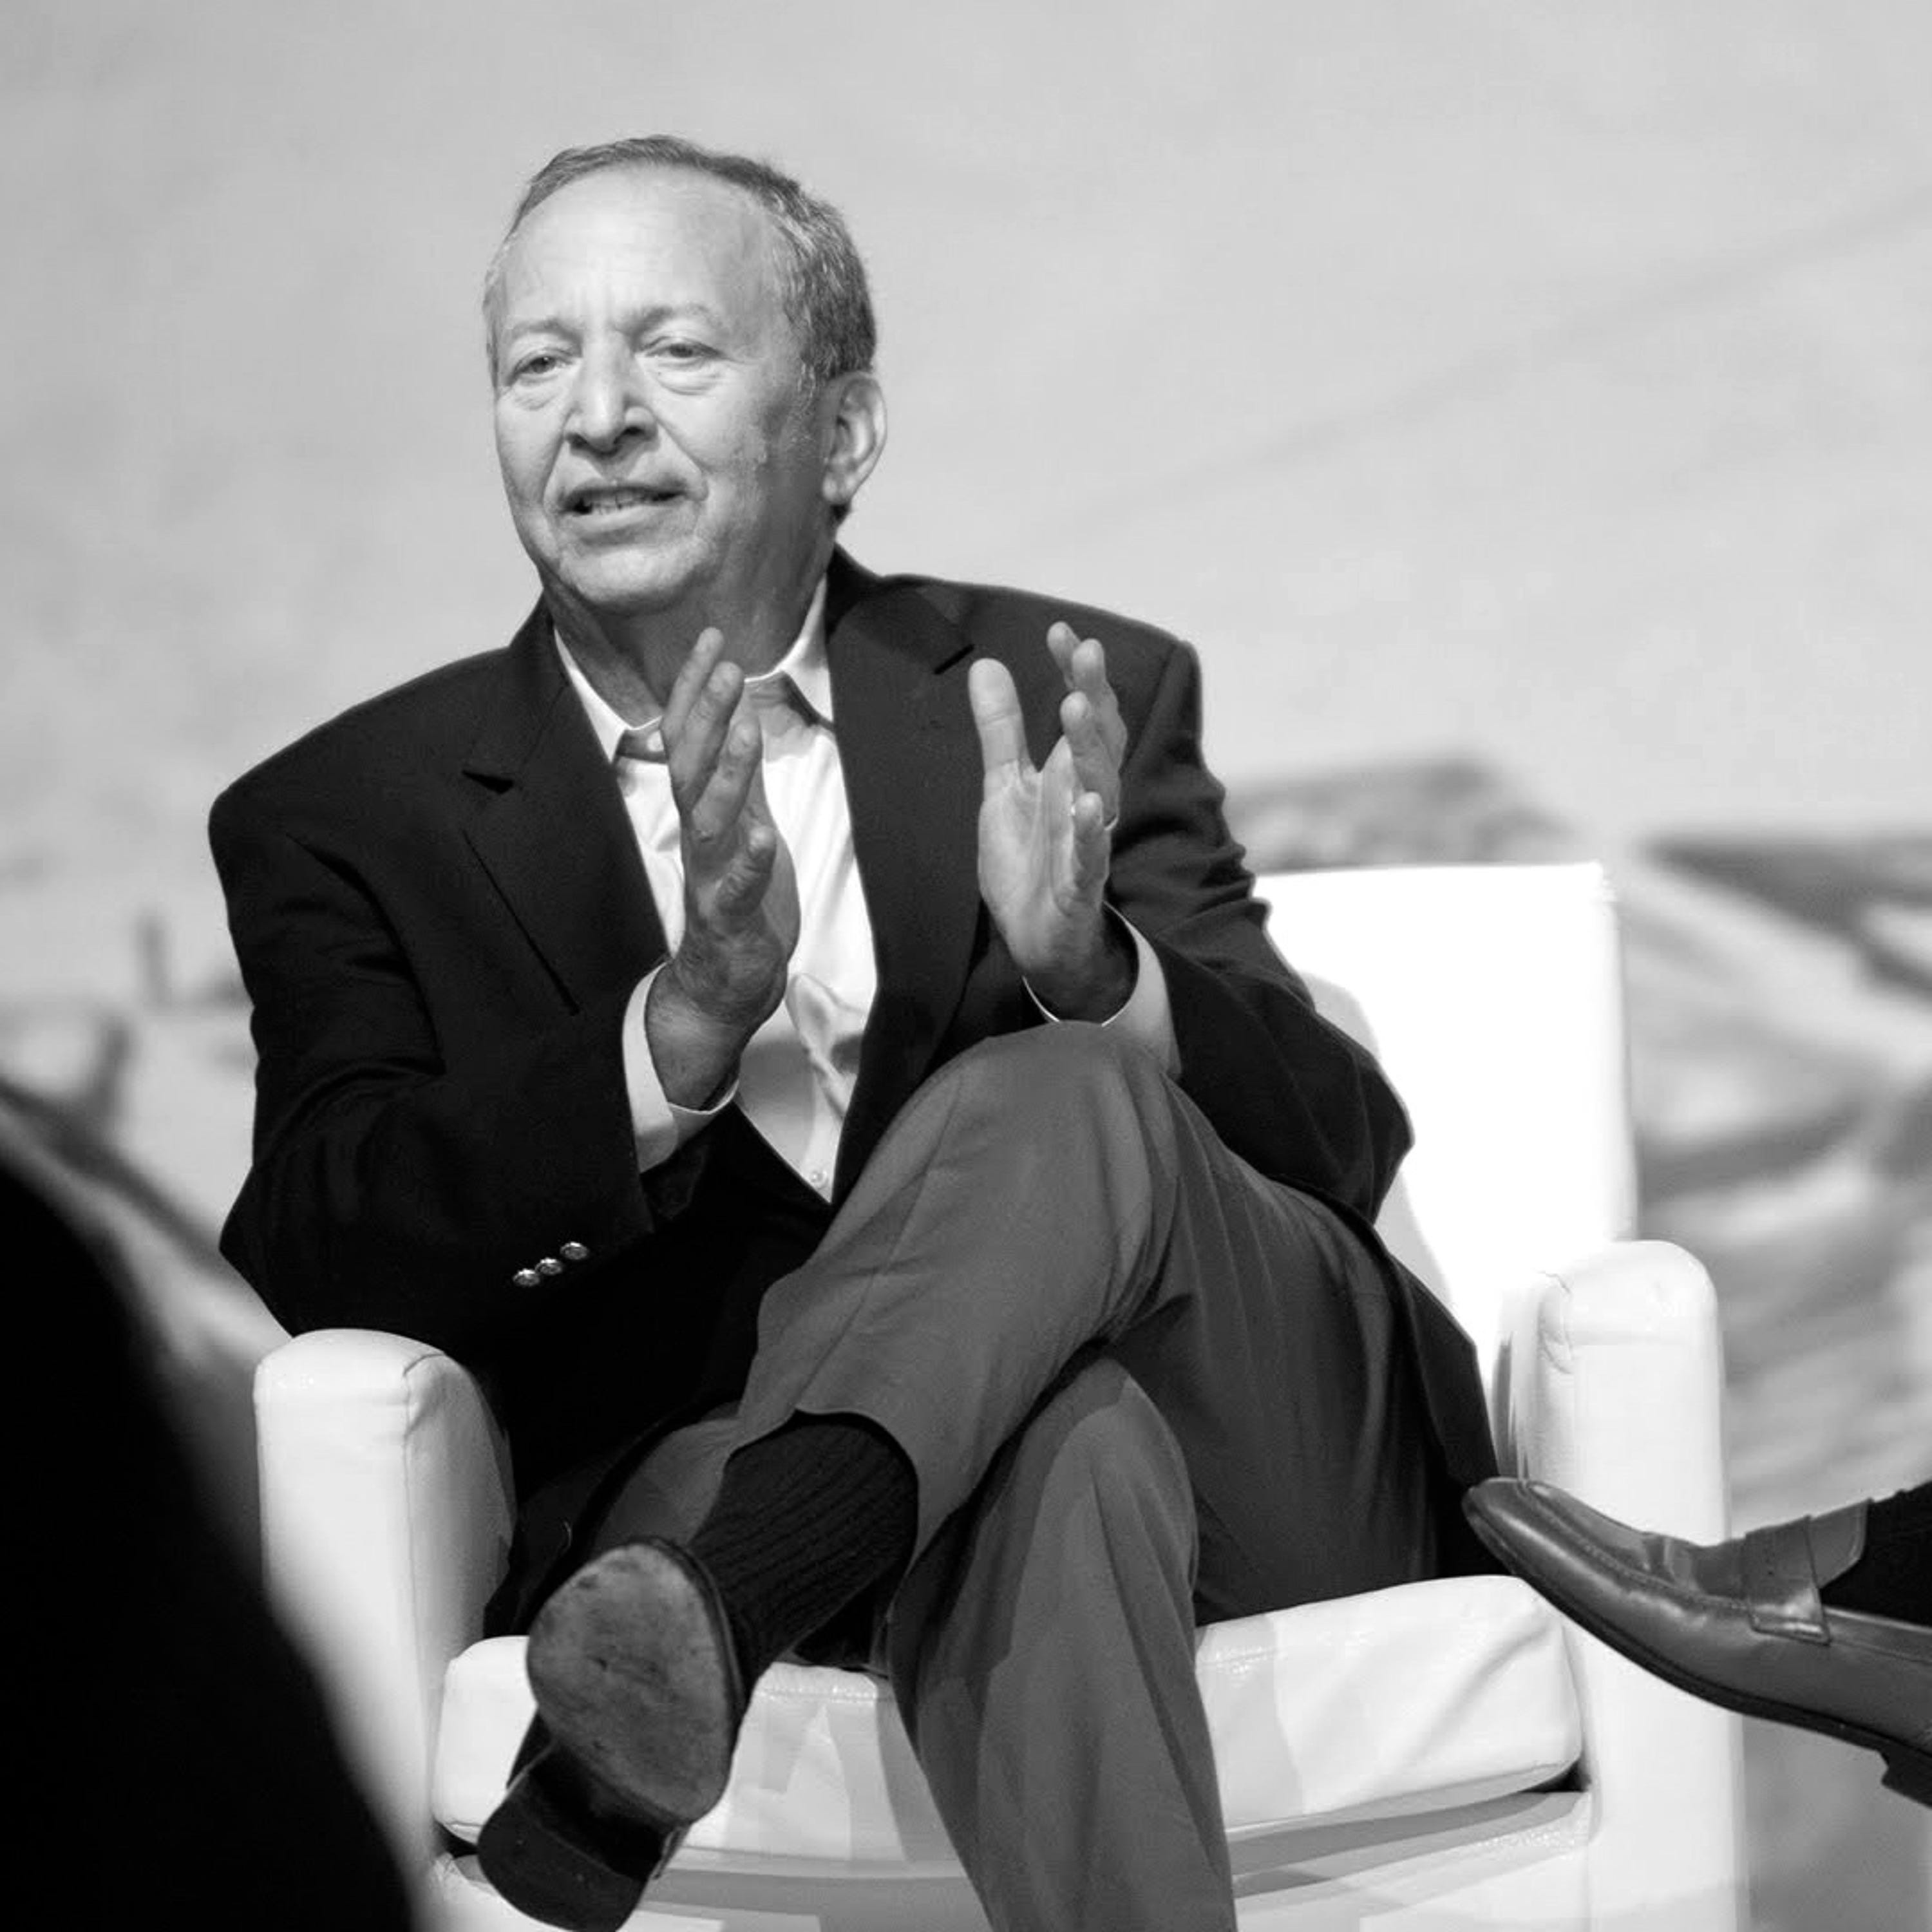 Larry Summers wants more speech and less comfort on campus